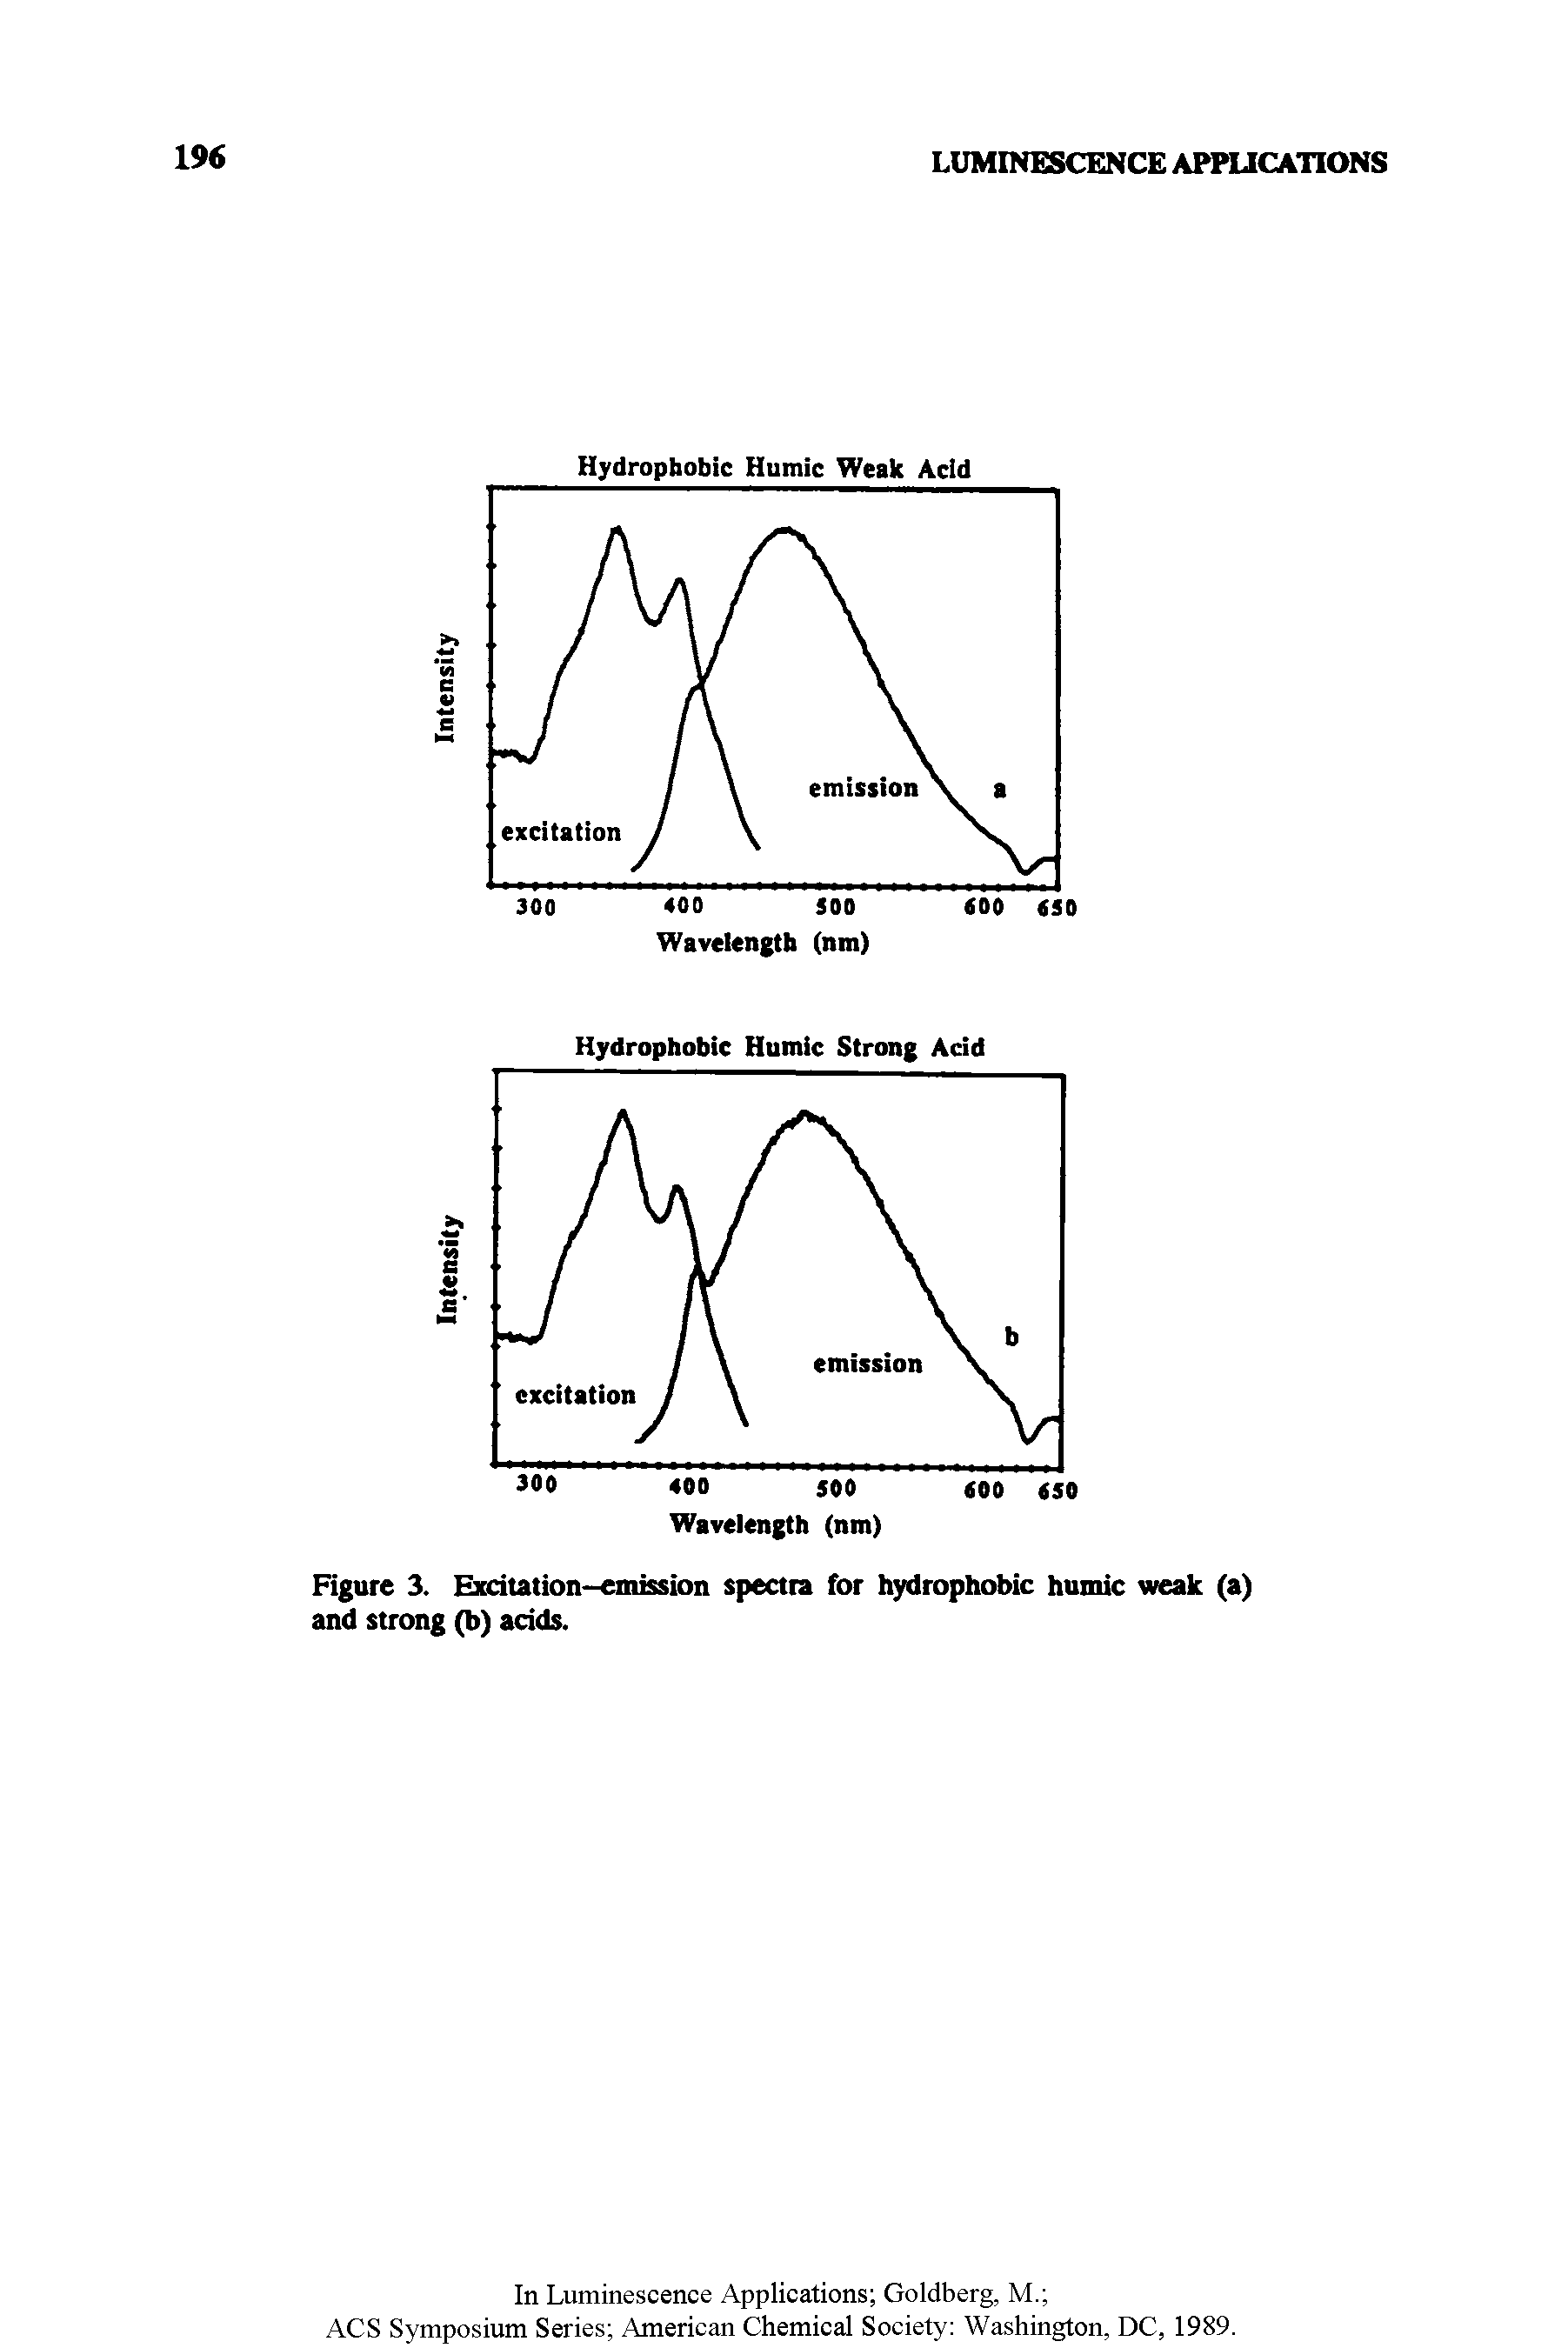 Figure 3. Excitation-emission spectra for hydrophobic humic weak (a) and strong (b) acids.